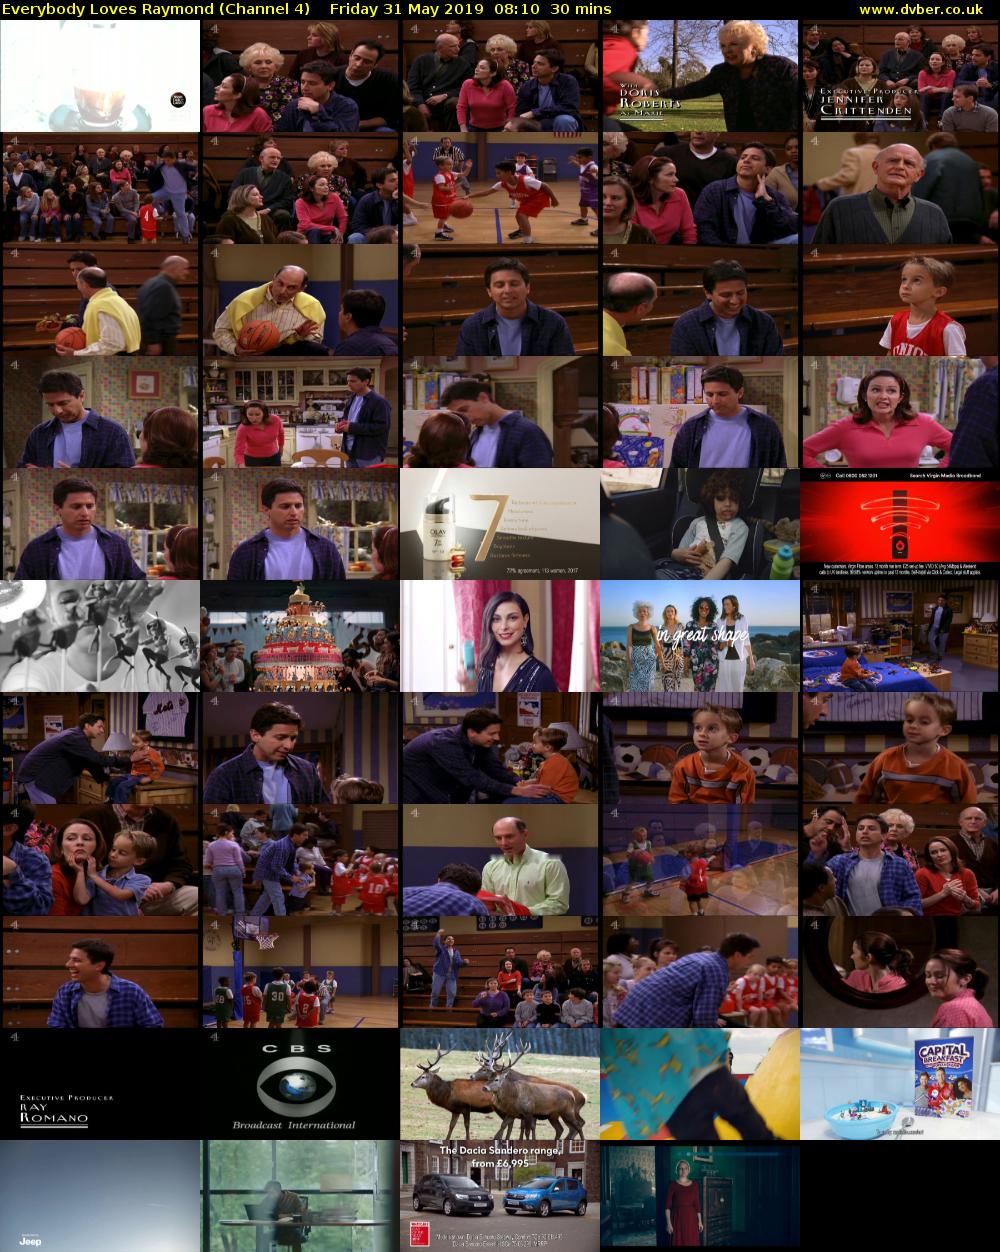 Everybody Loves Raymond (Channel 4) Friday 31 May 2019 08:10 - 08:40